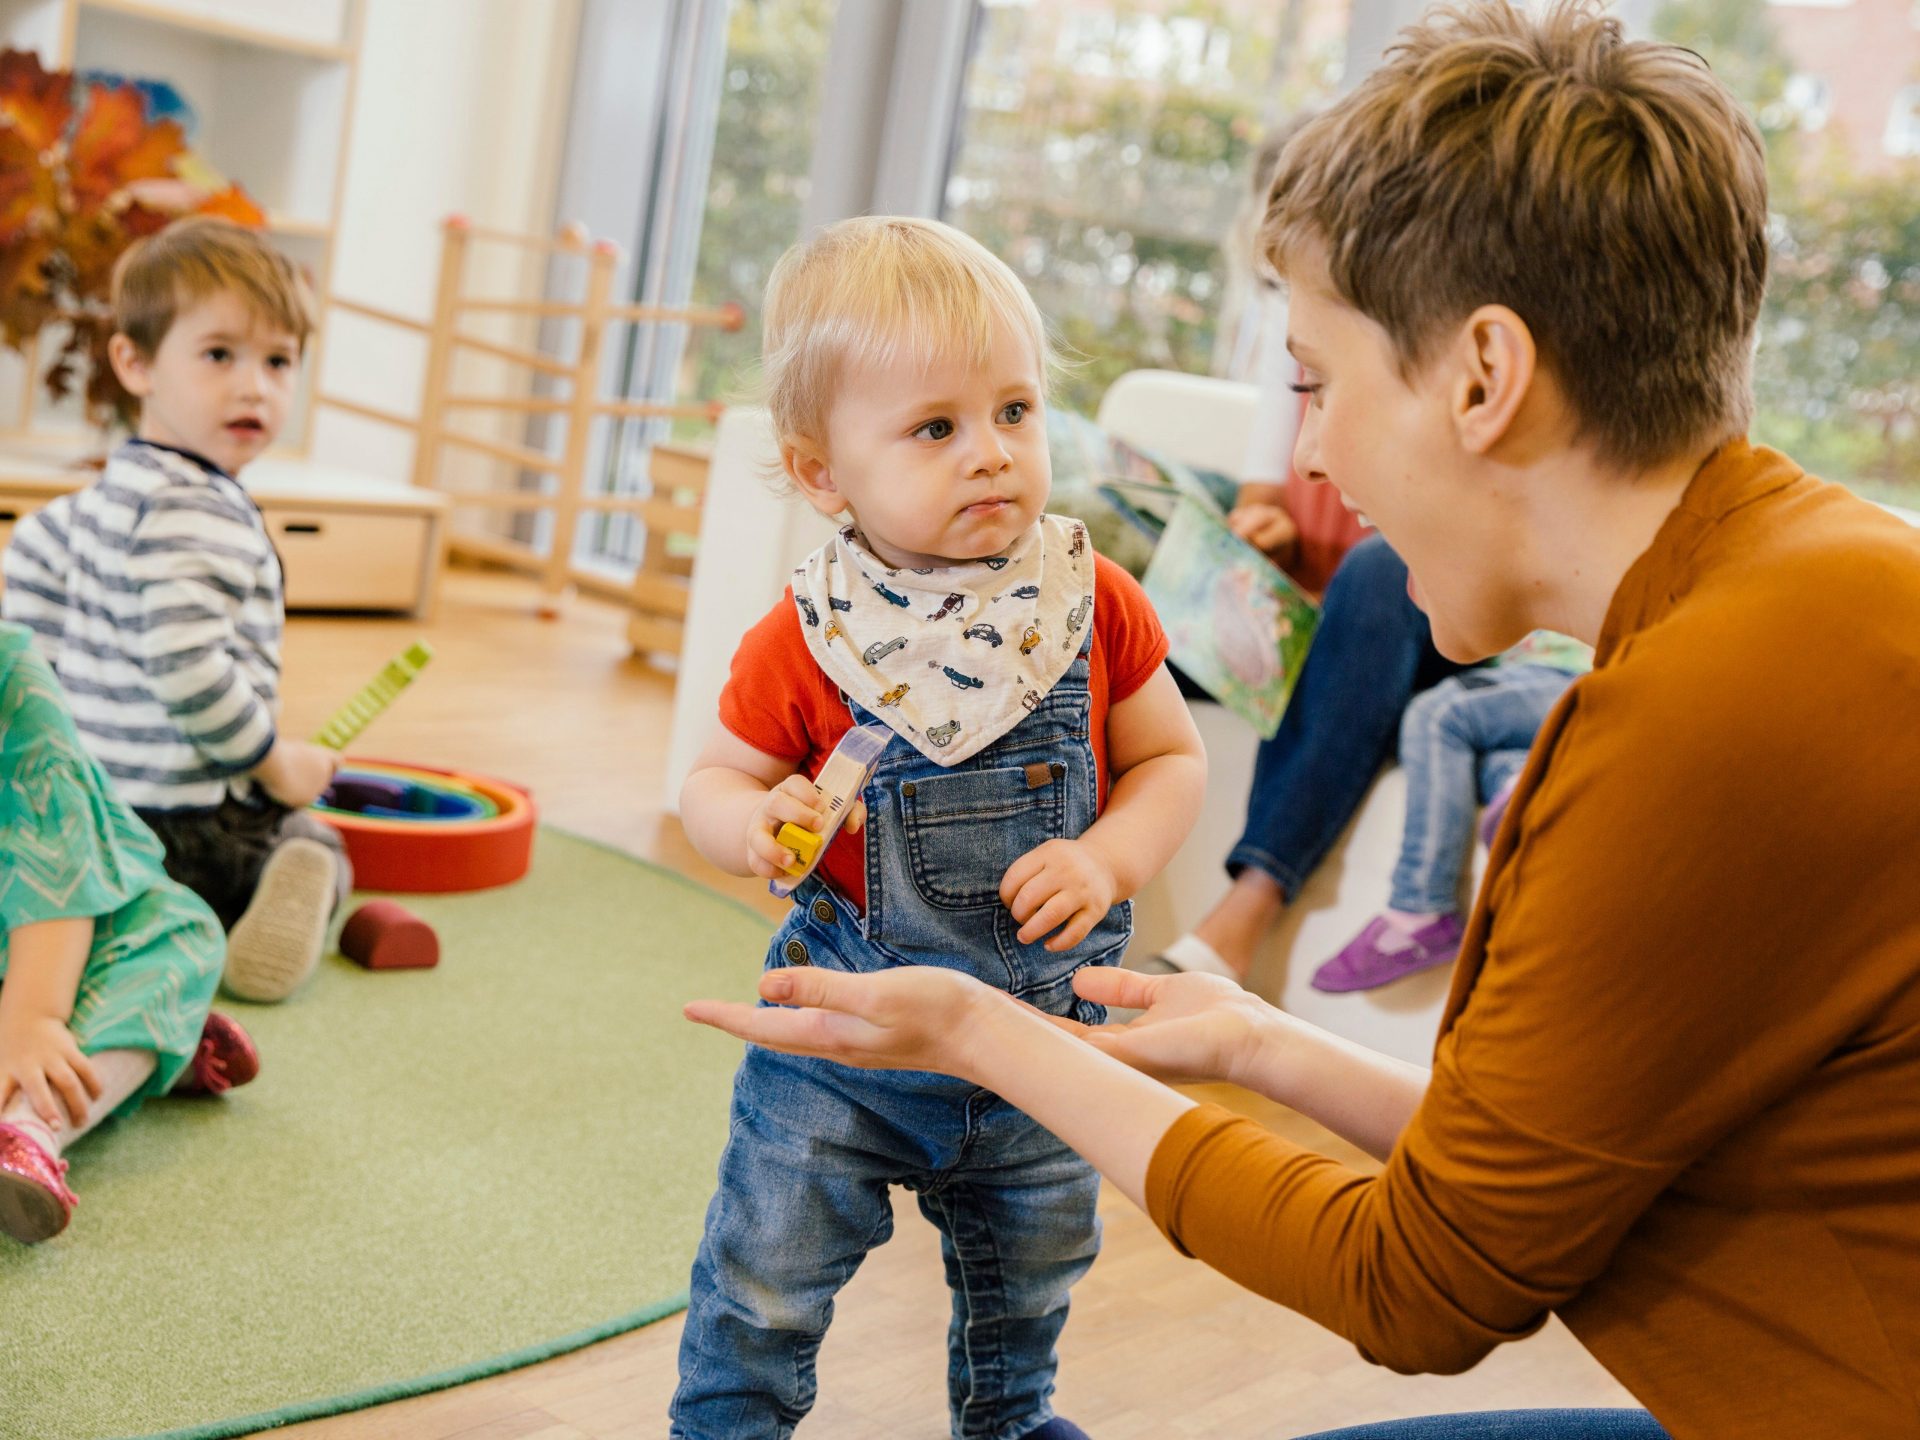 5 critical steps for getting your baby into an elite preschool, in step with a aged admissions handbook